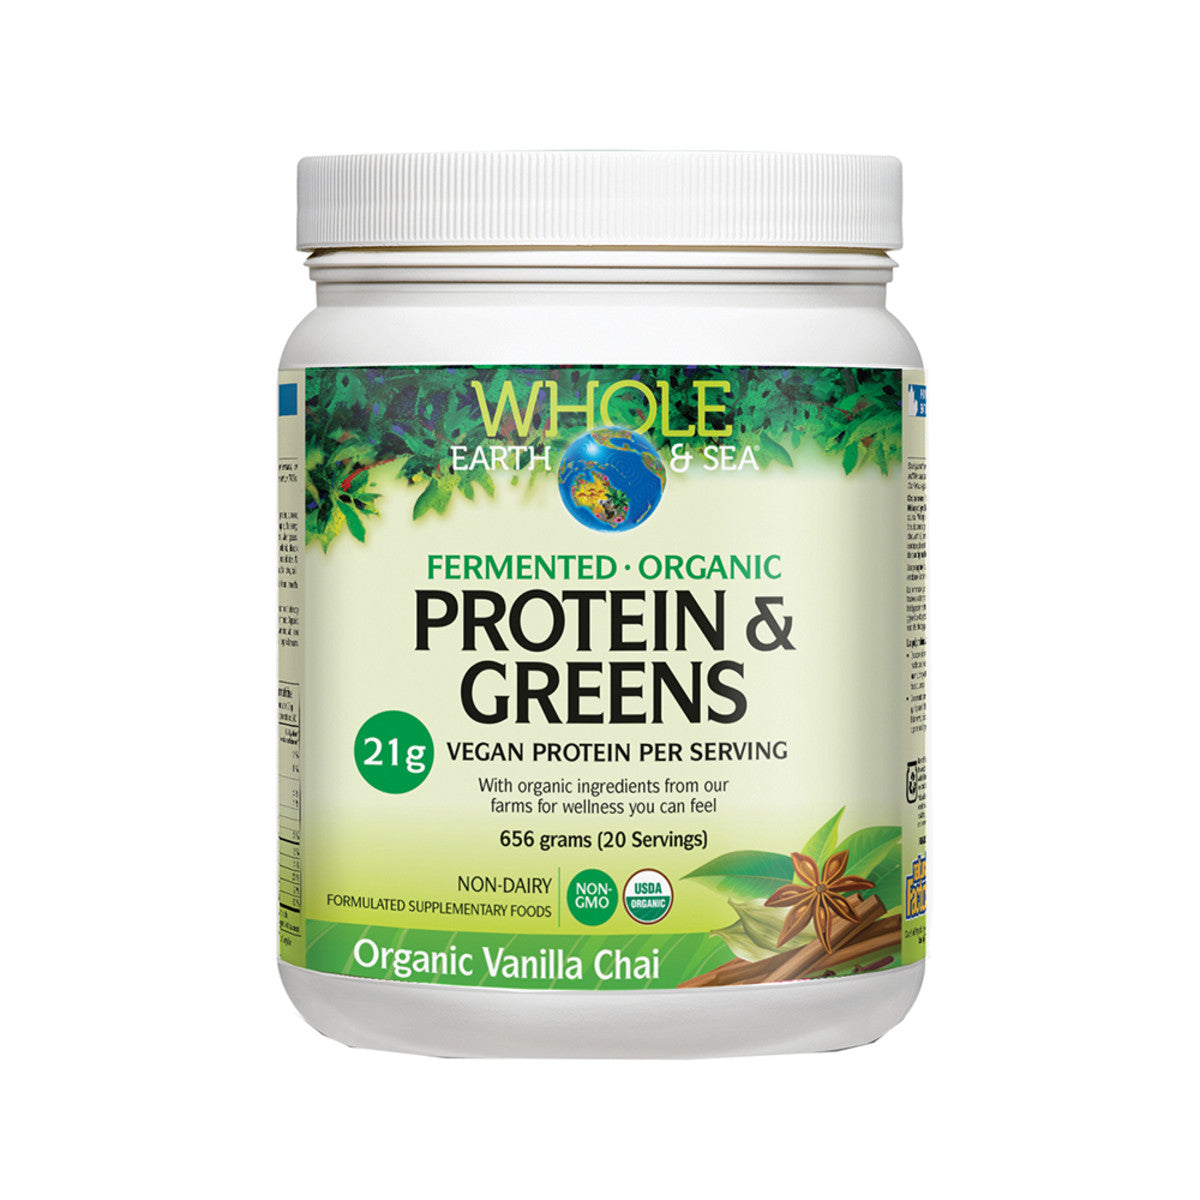 Whole Earth & Sea Protein & Greens 656g, Vanilla Chai Flavour Certified Organic & Fermented Protein